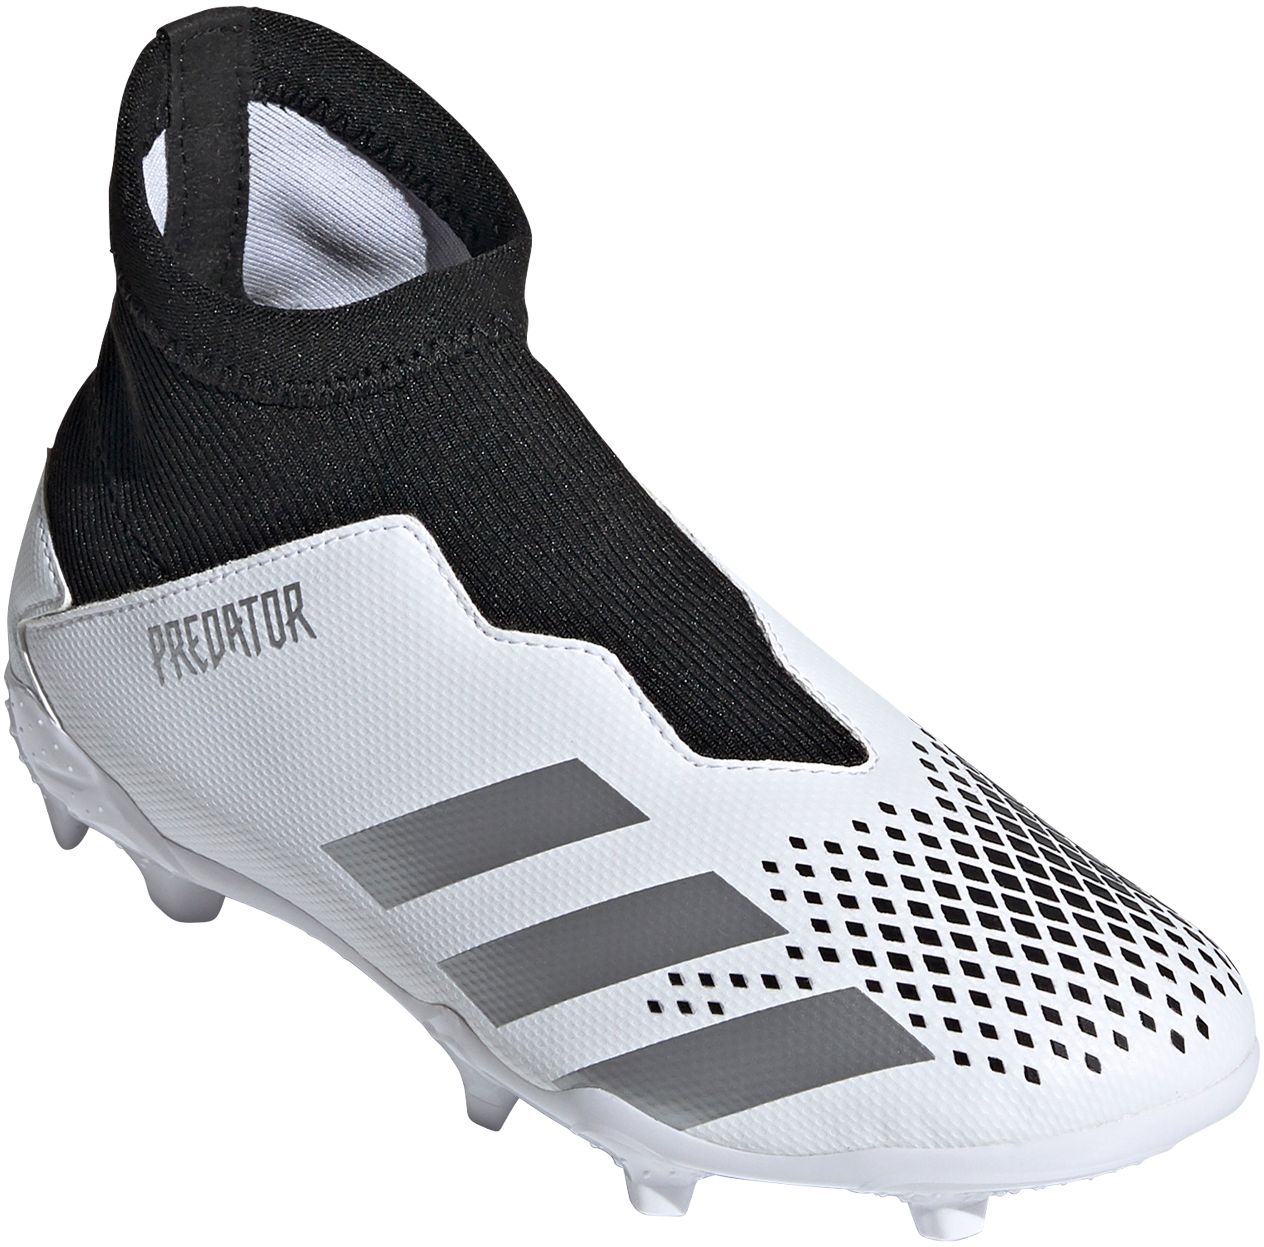 boys laceless soccer cleats